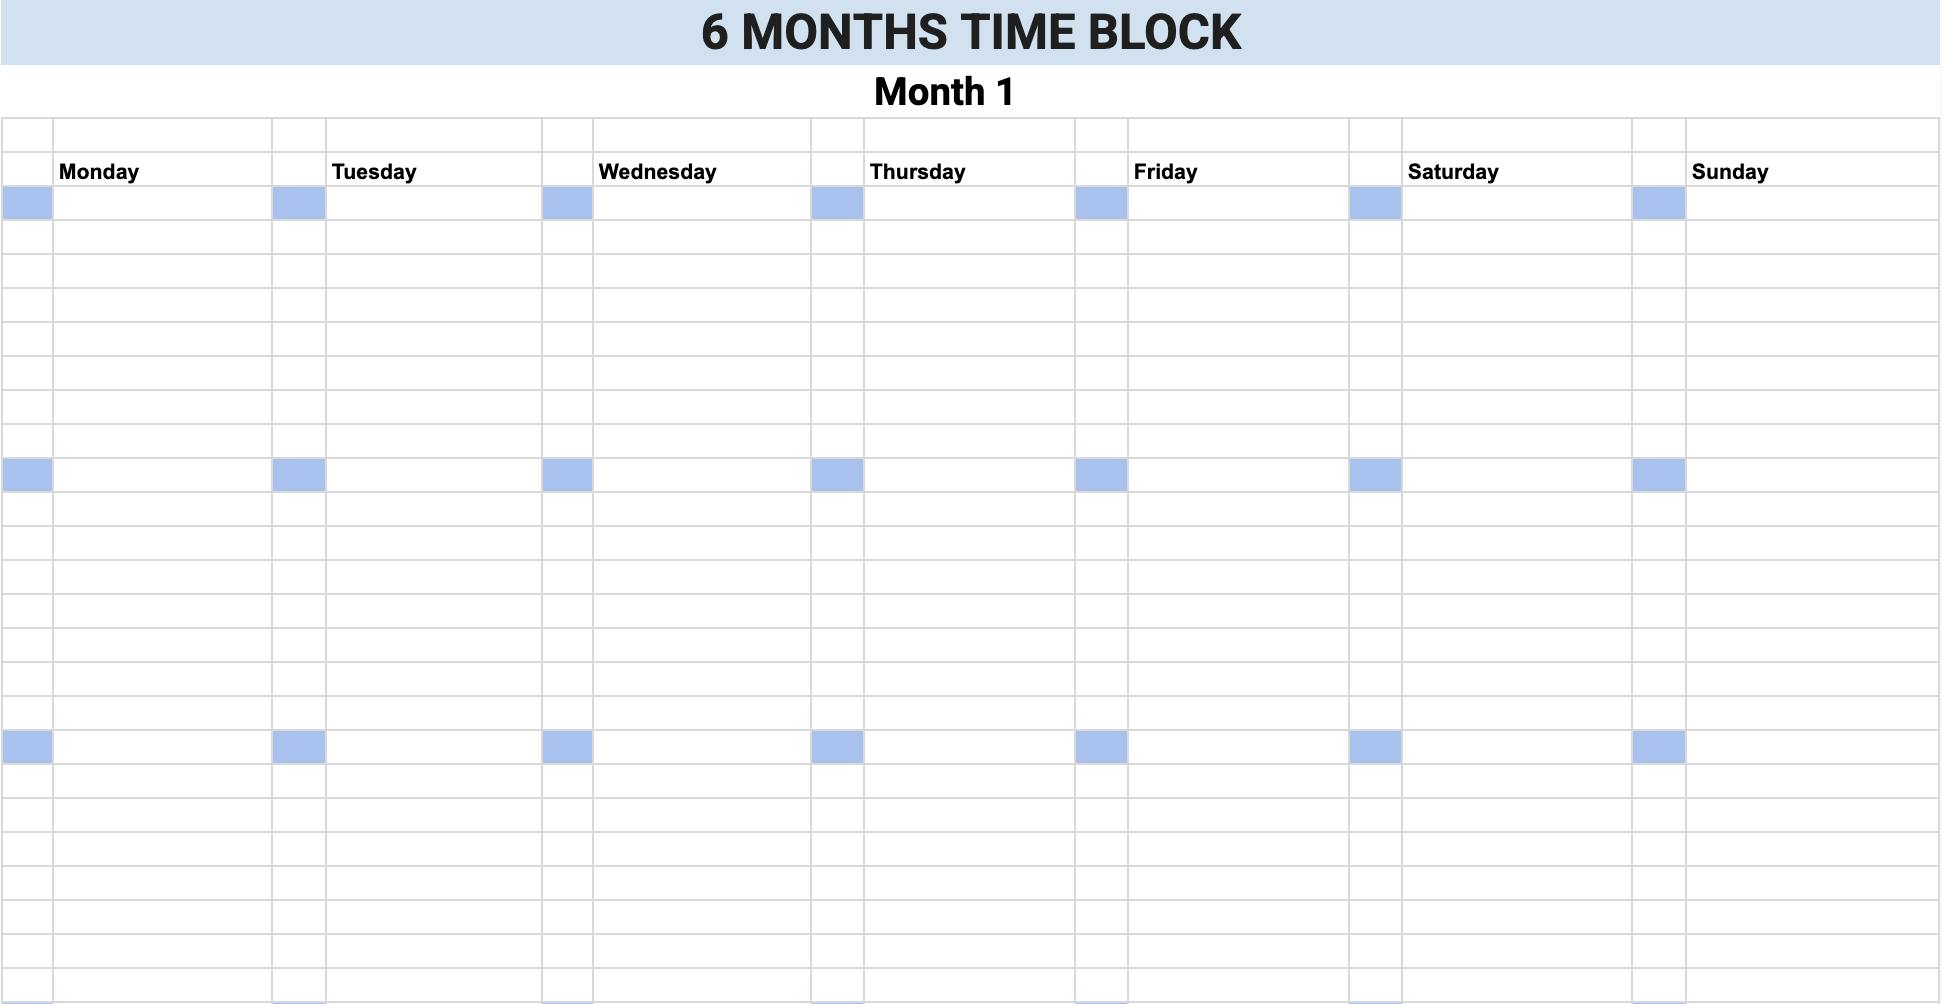 Six months time block template